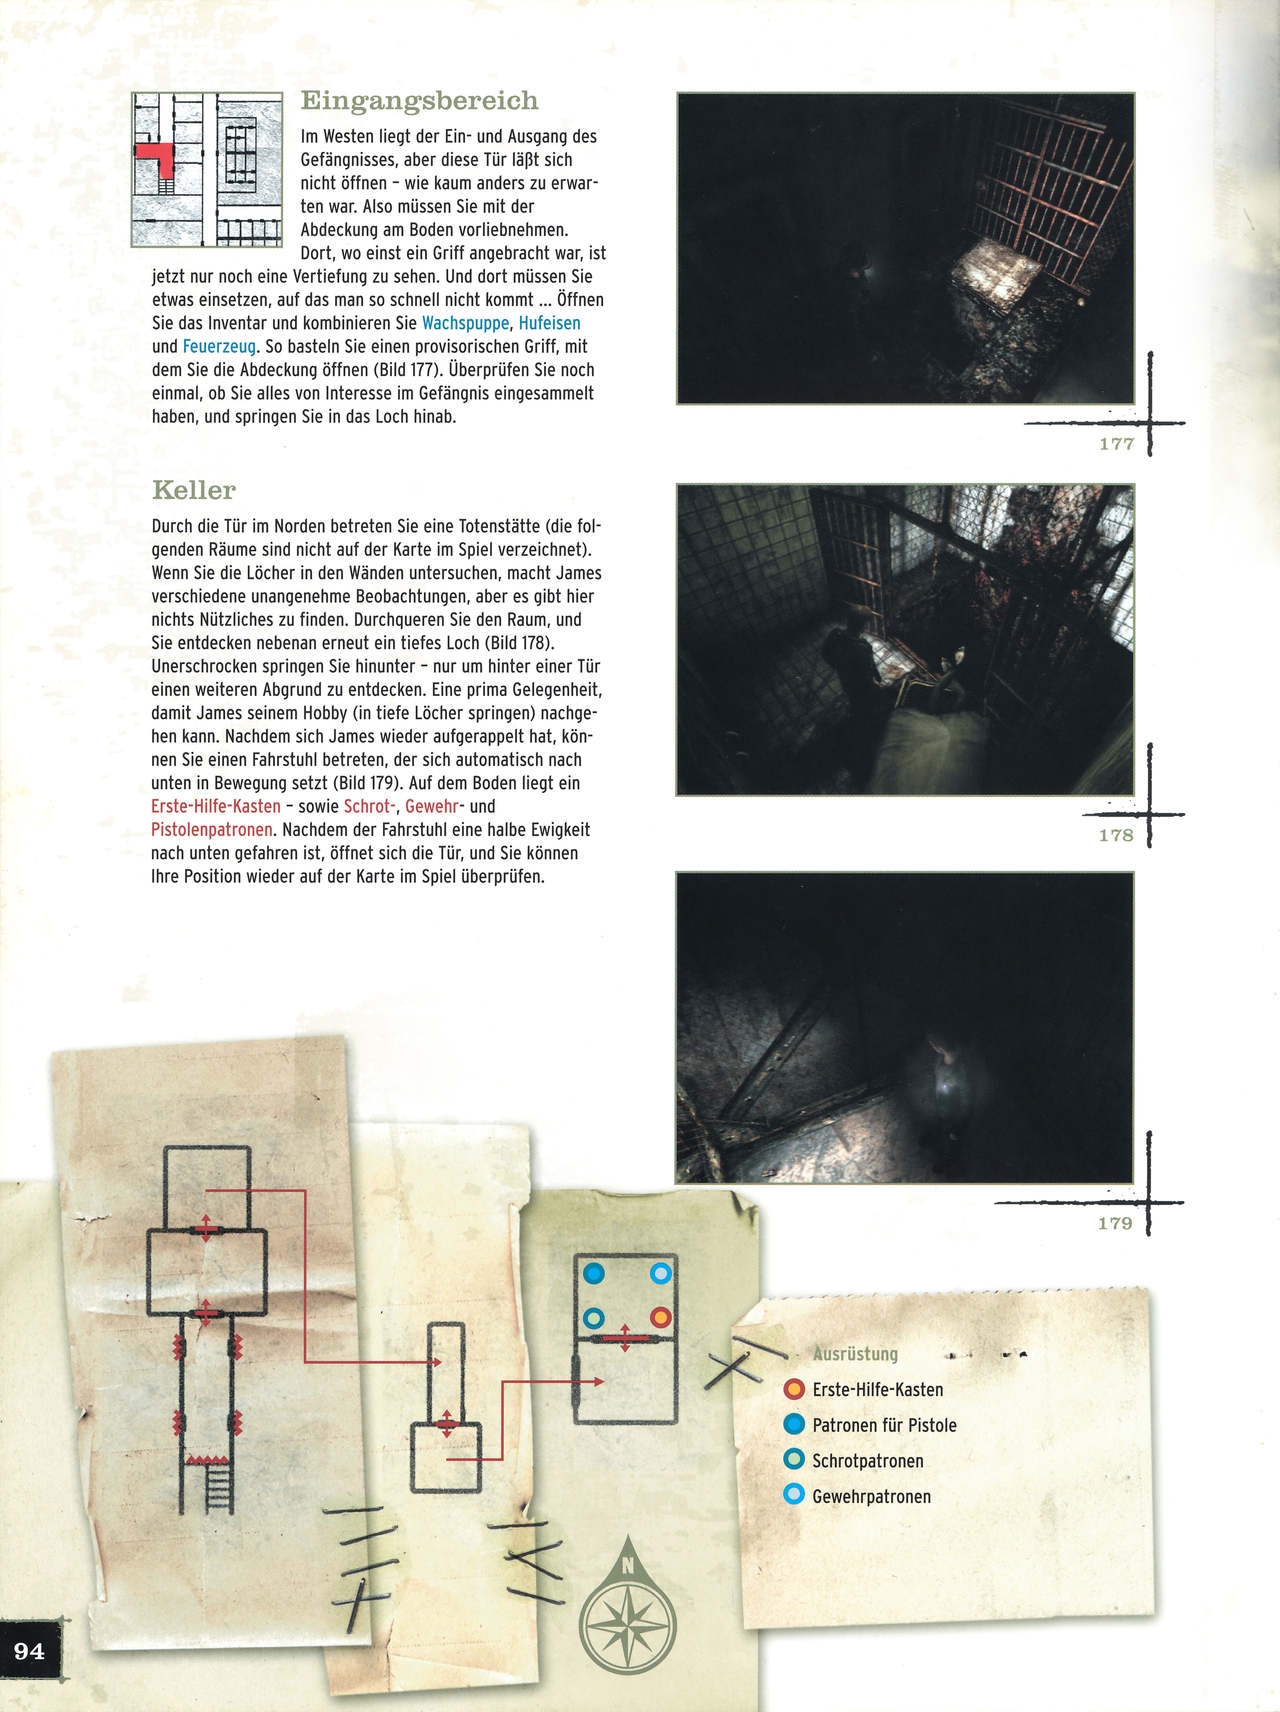 Silent Hill 2 Official Strategy Guide Authoritzed Collection 93